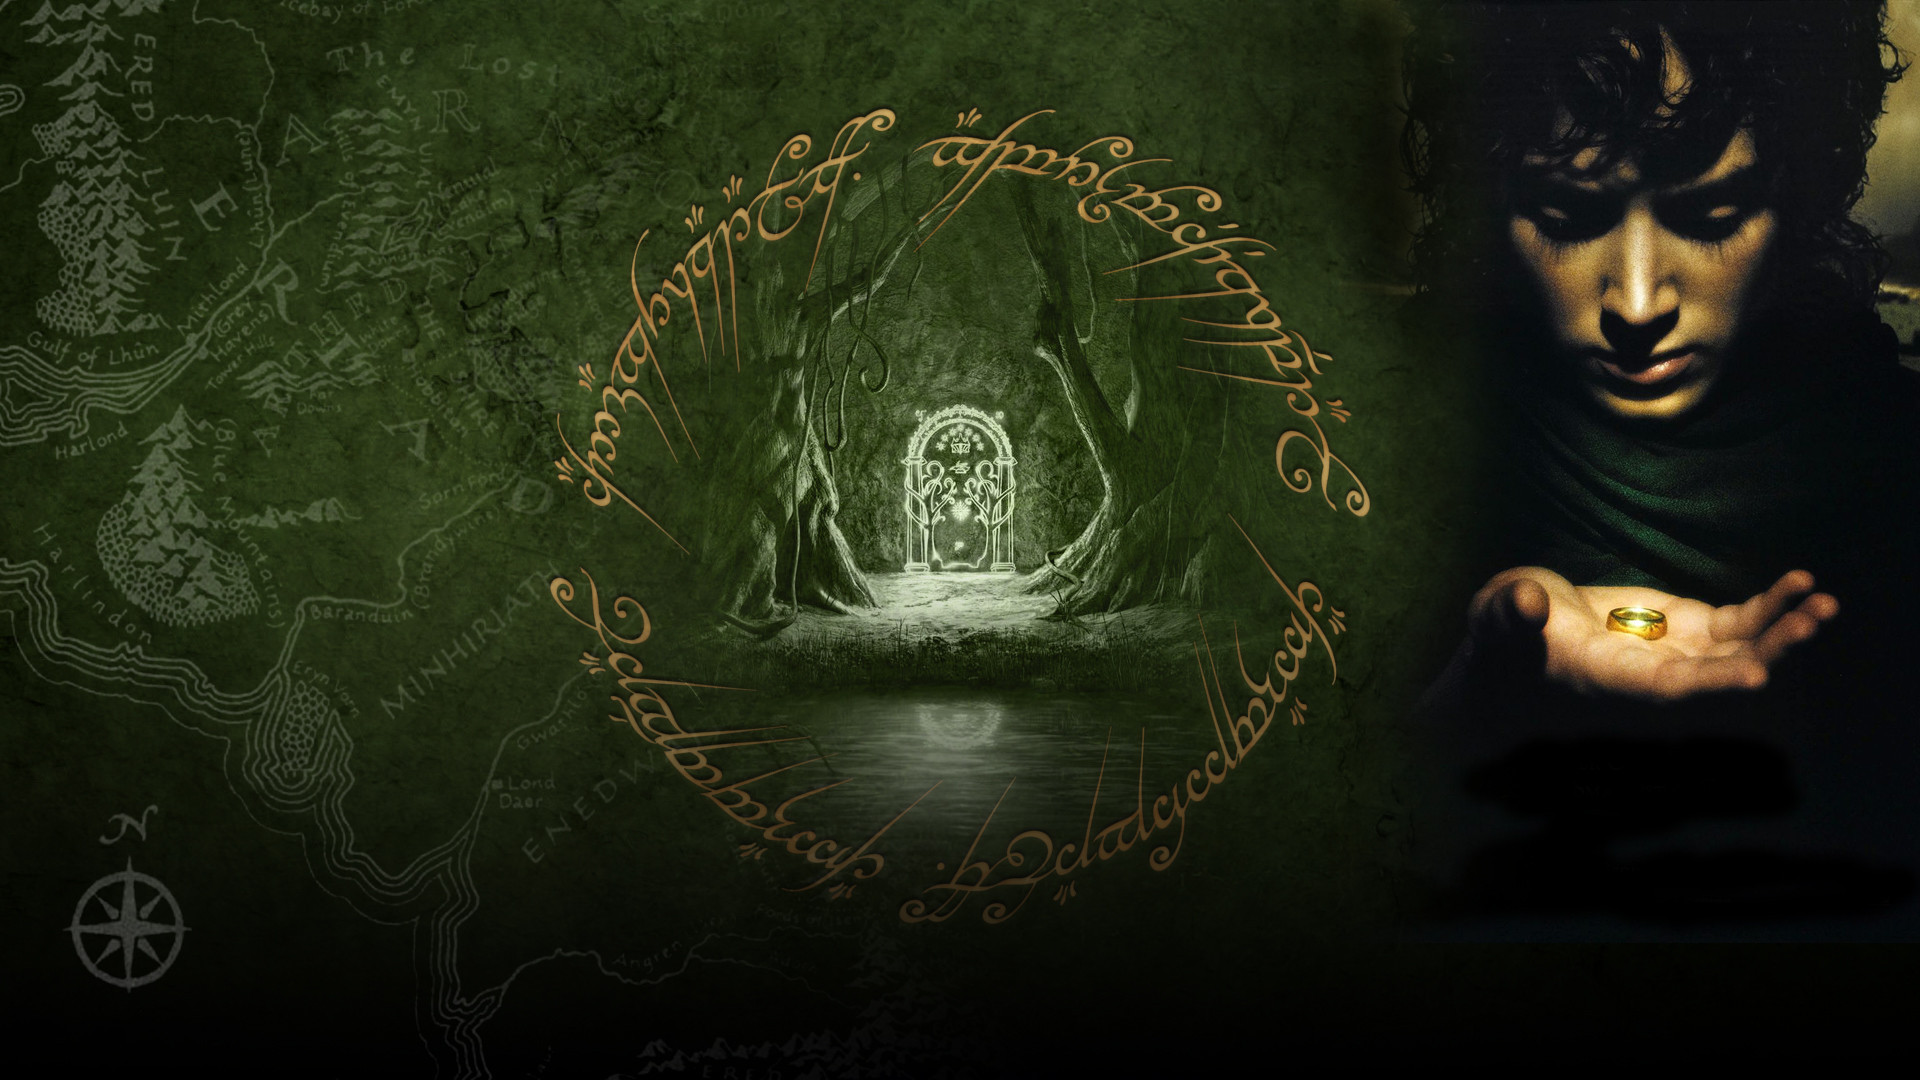 Movie The Lord Of The Rings The Fellowship Of The Ring 1920x1080